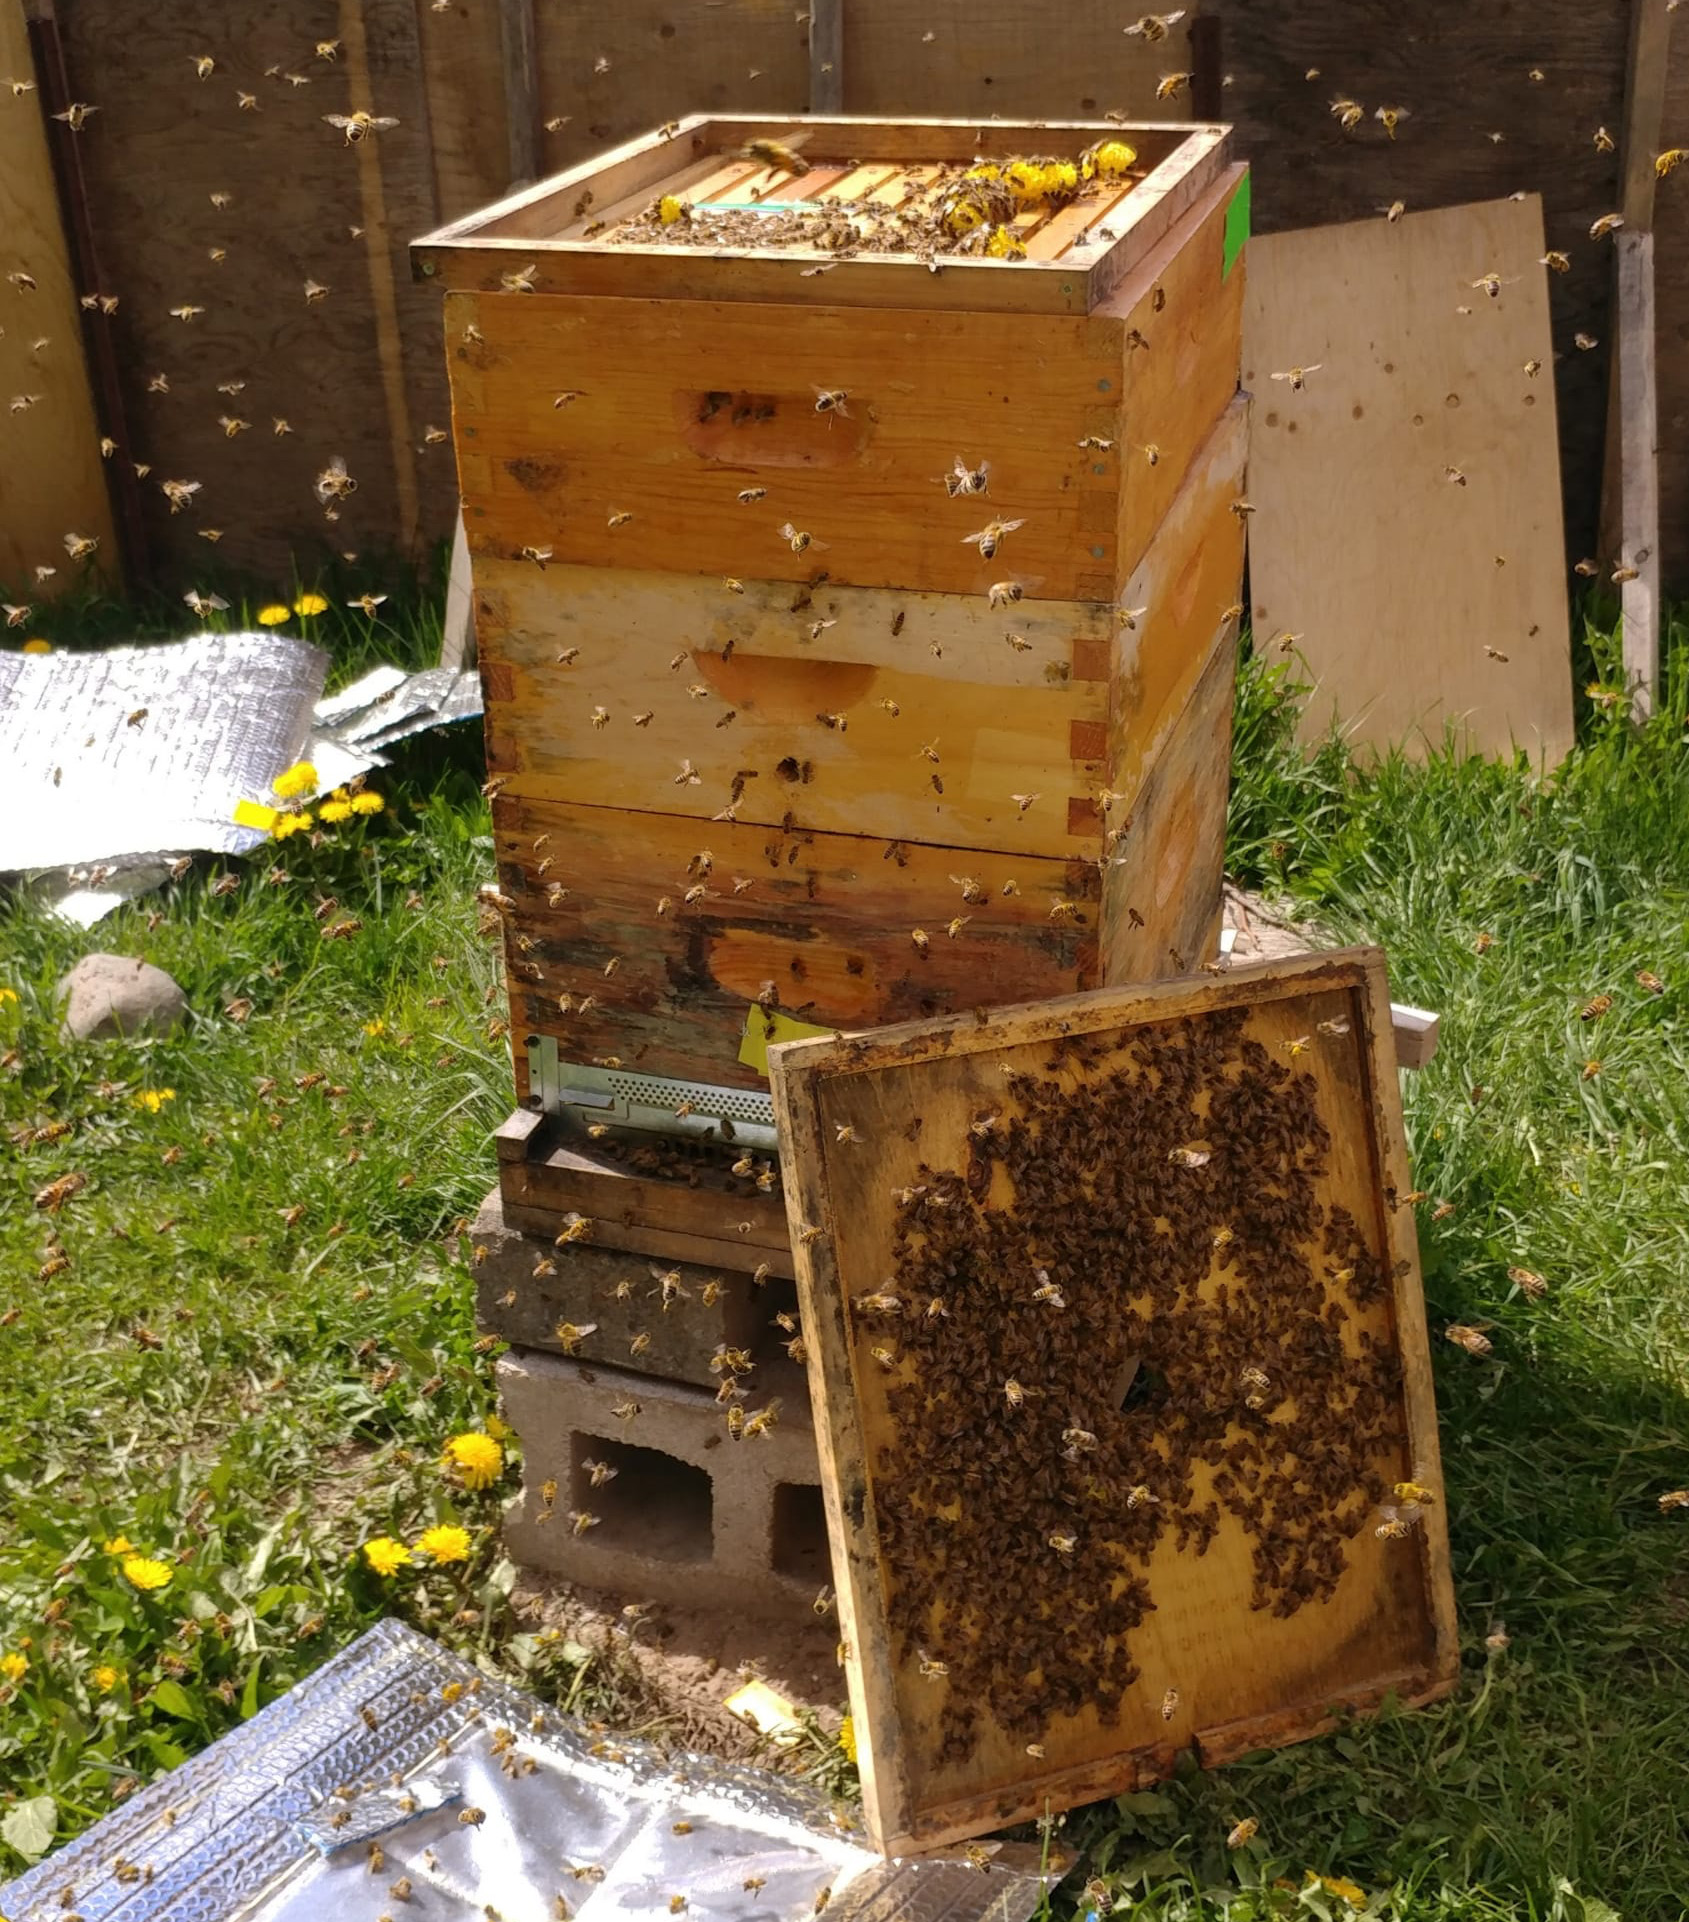 Bees flying around open hive